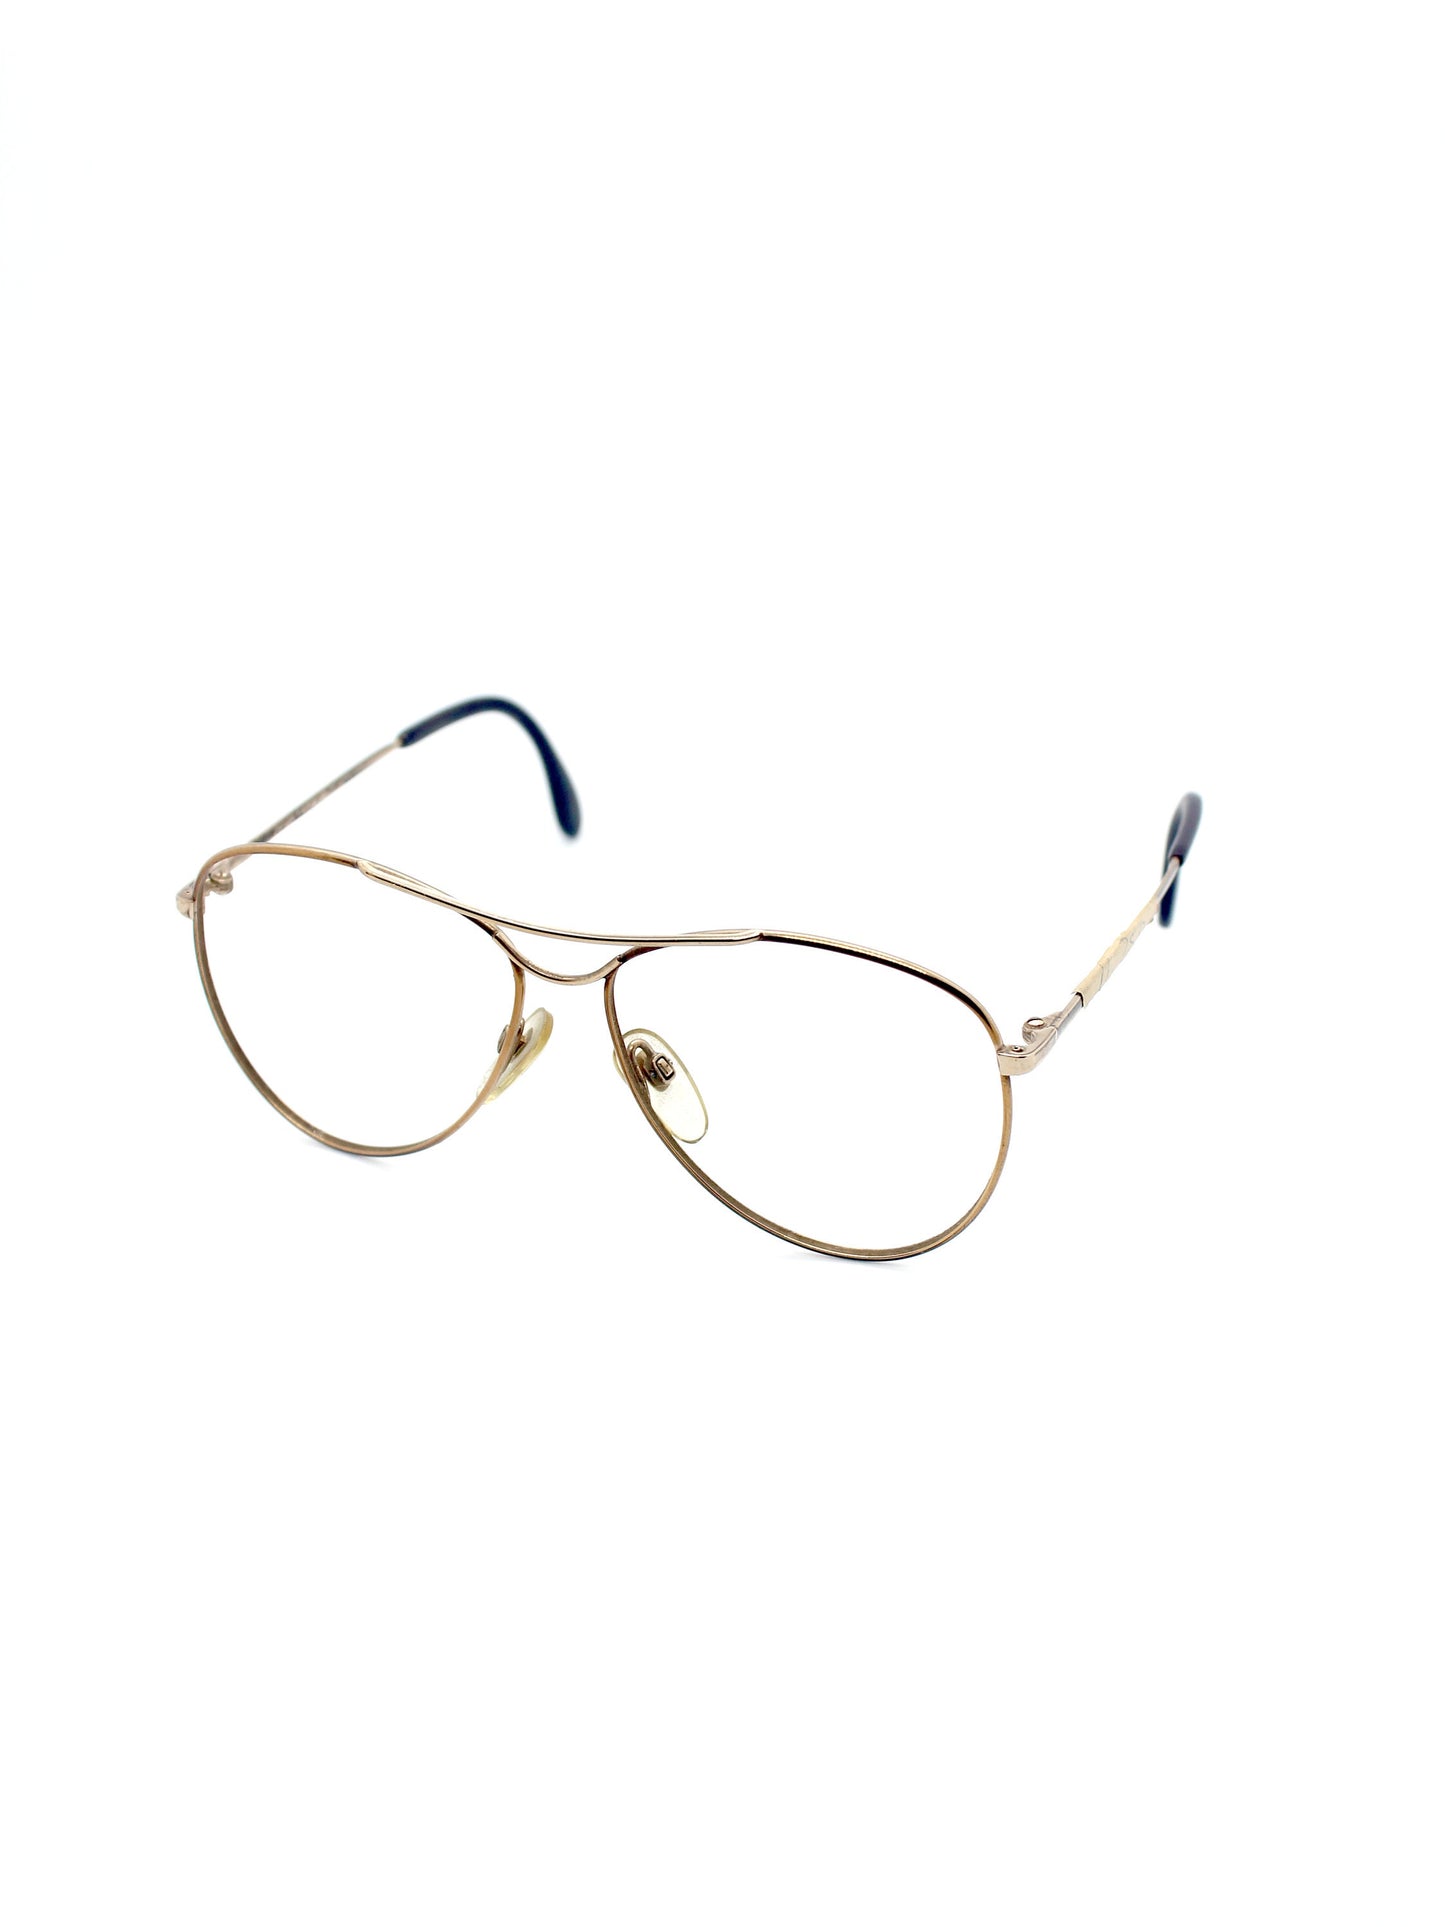 Rodenstock Young Look 129 White - Eyeglasses